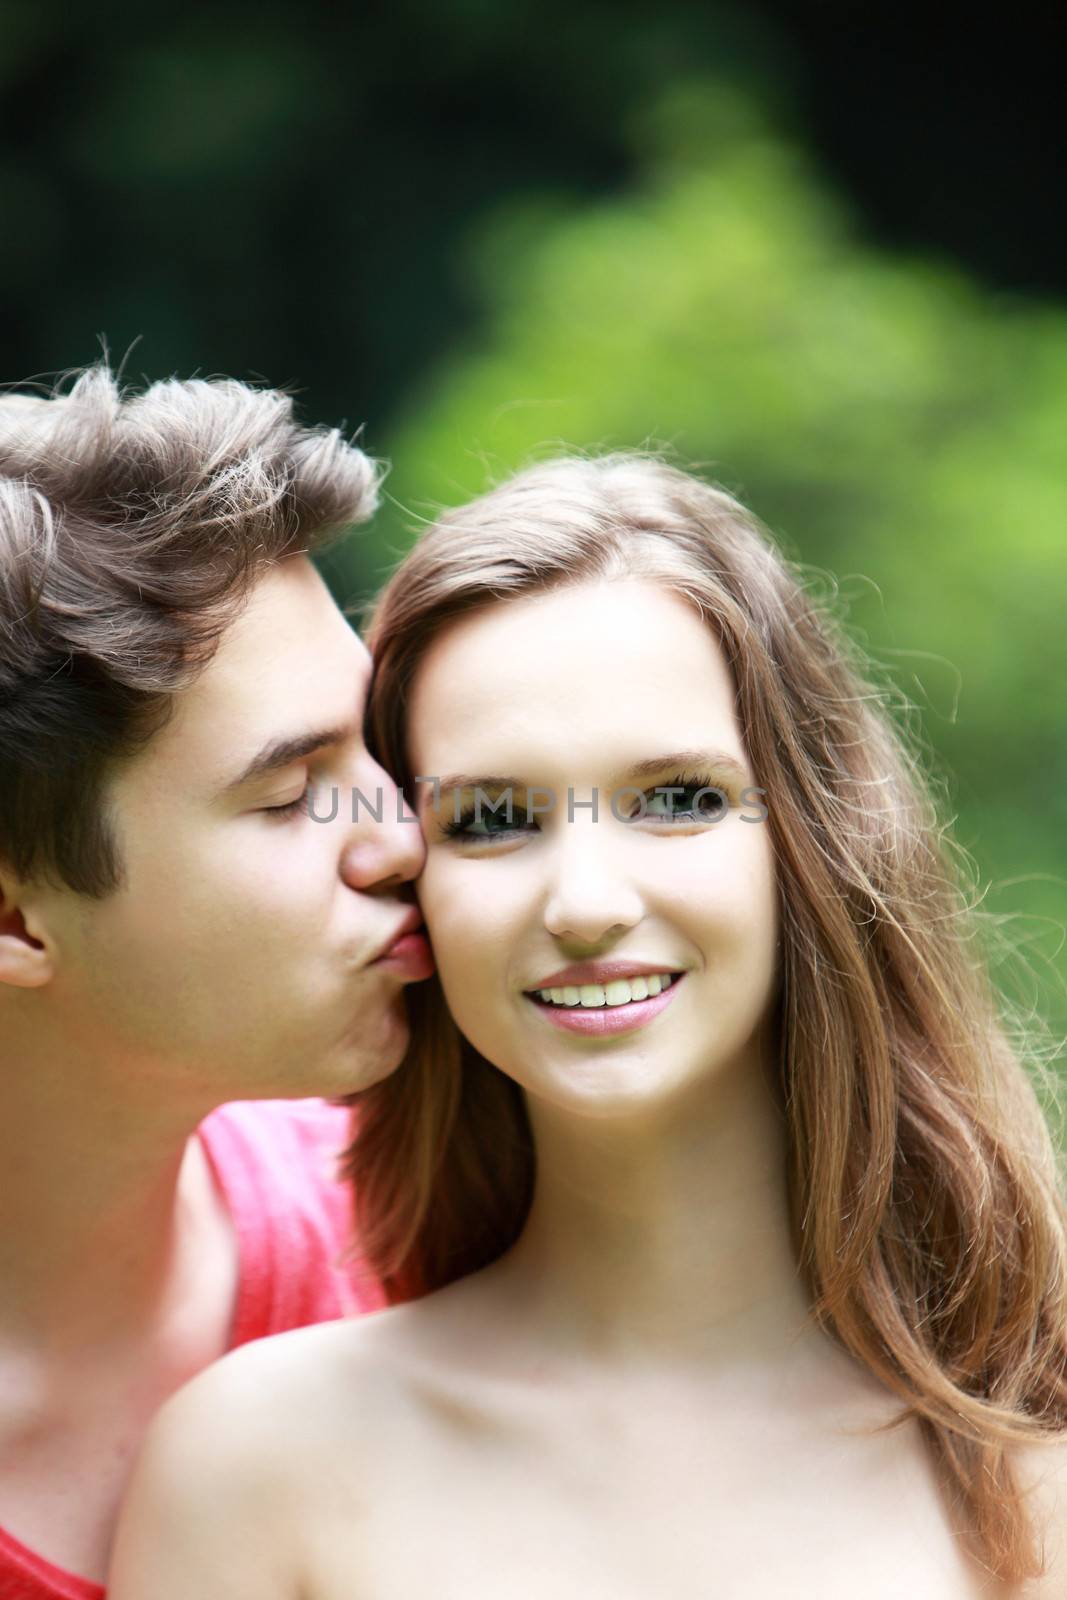 Handsome young man kissing his pretty teenage girlfriend outdoors against greenery